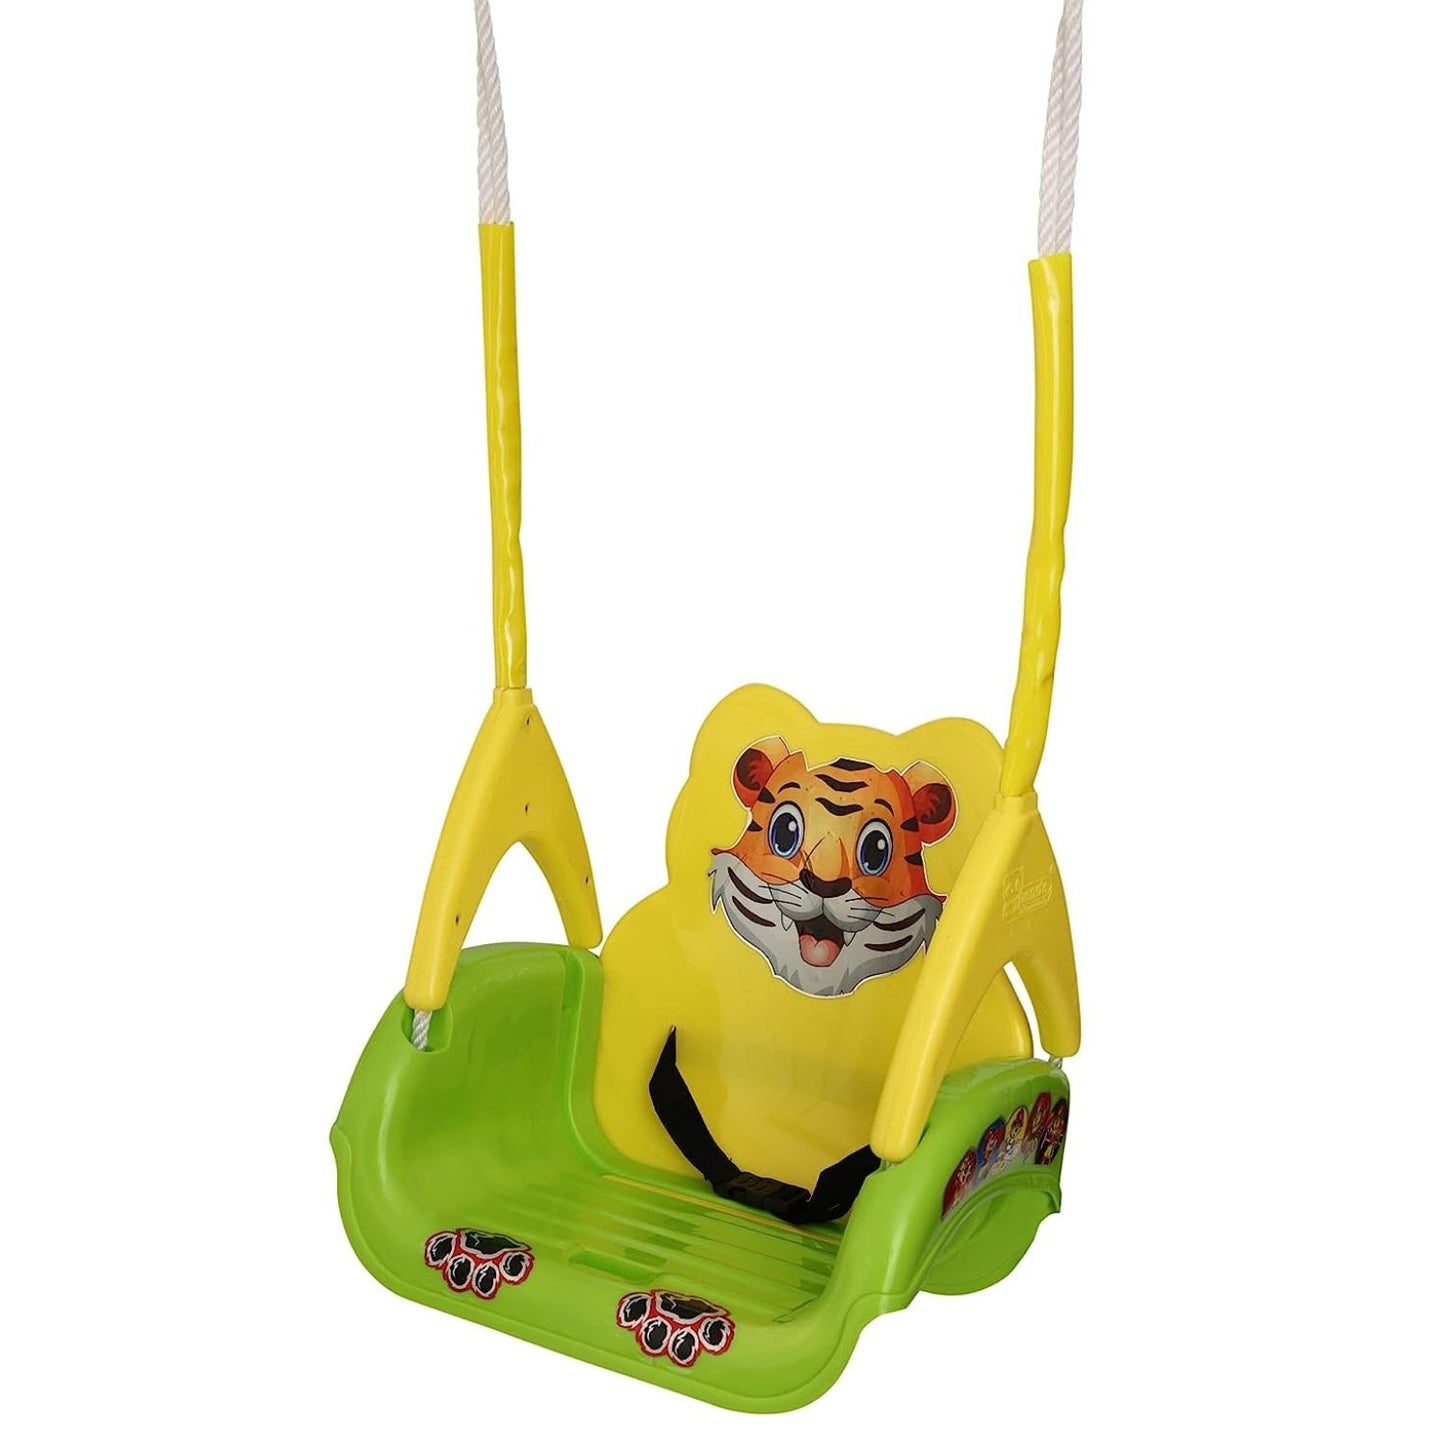 MM TOYS Panda Musical Swing | 4 Stages Adjustments | 6 Months to 6 Years | Color May Vary